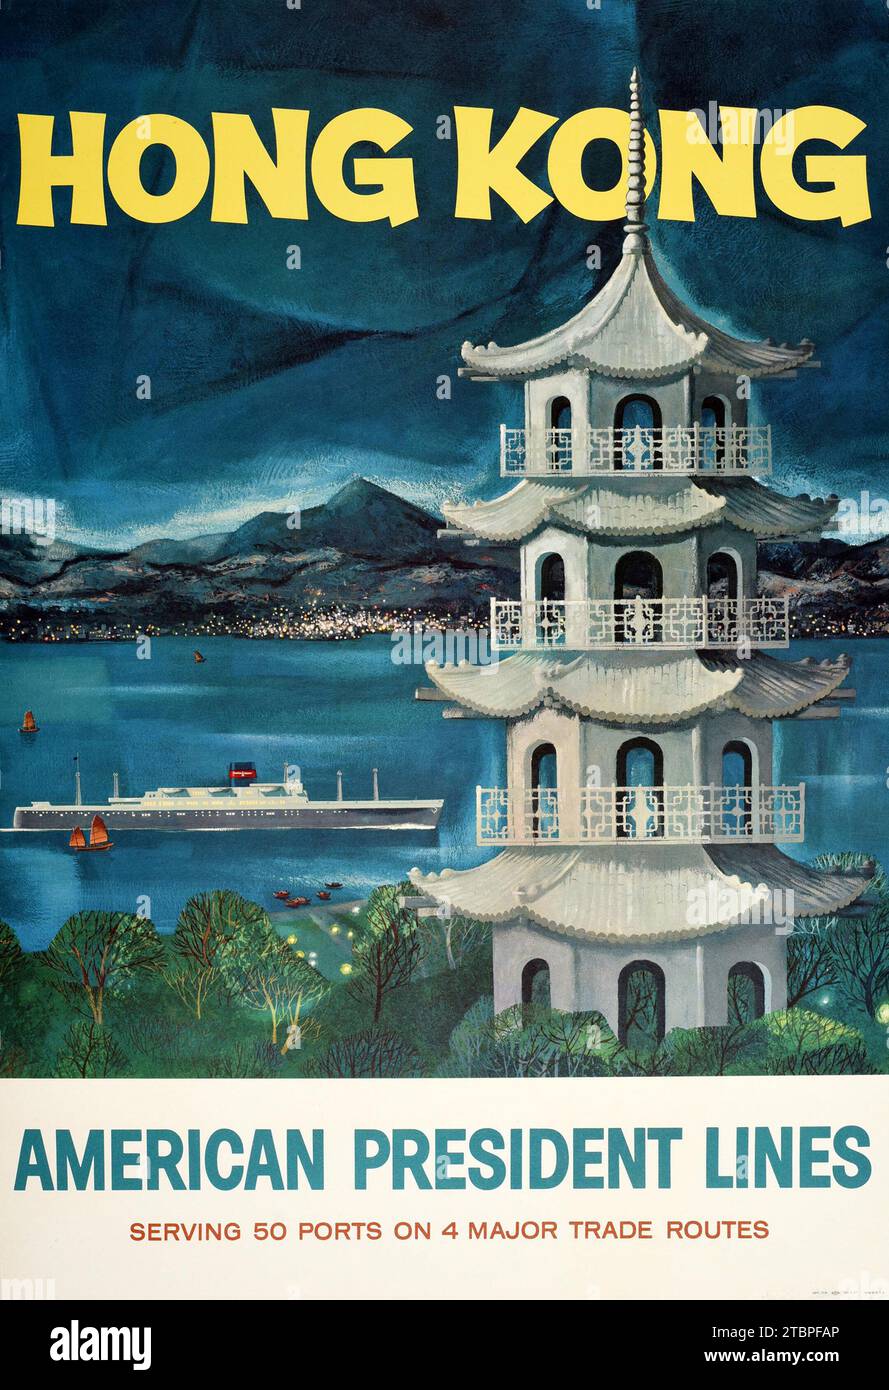 Vintage Asia Travel Poster - Hong Kong - American President Lines 1957 Banque D'Images